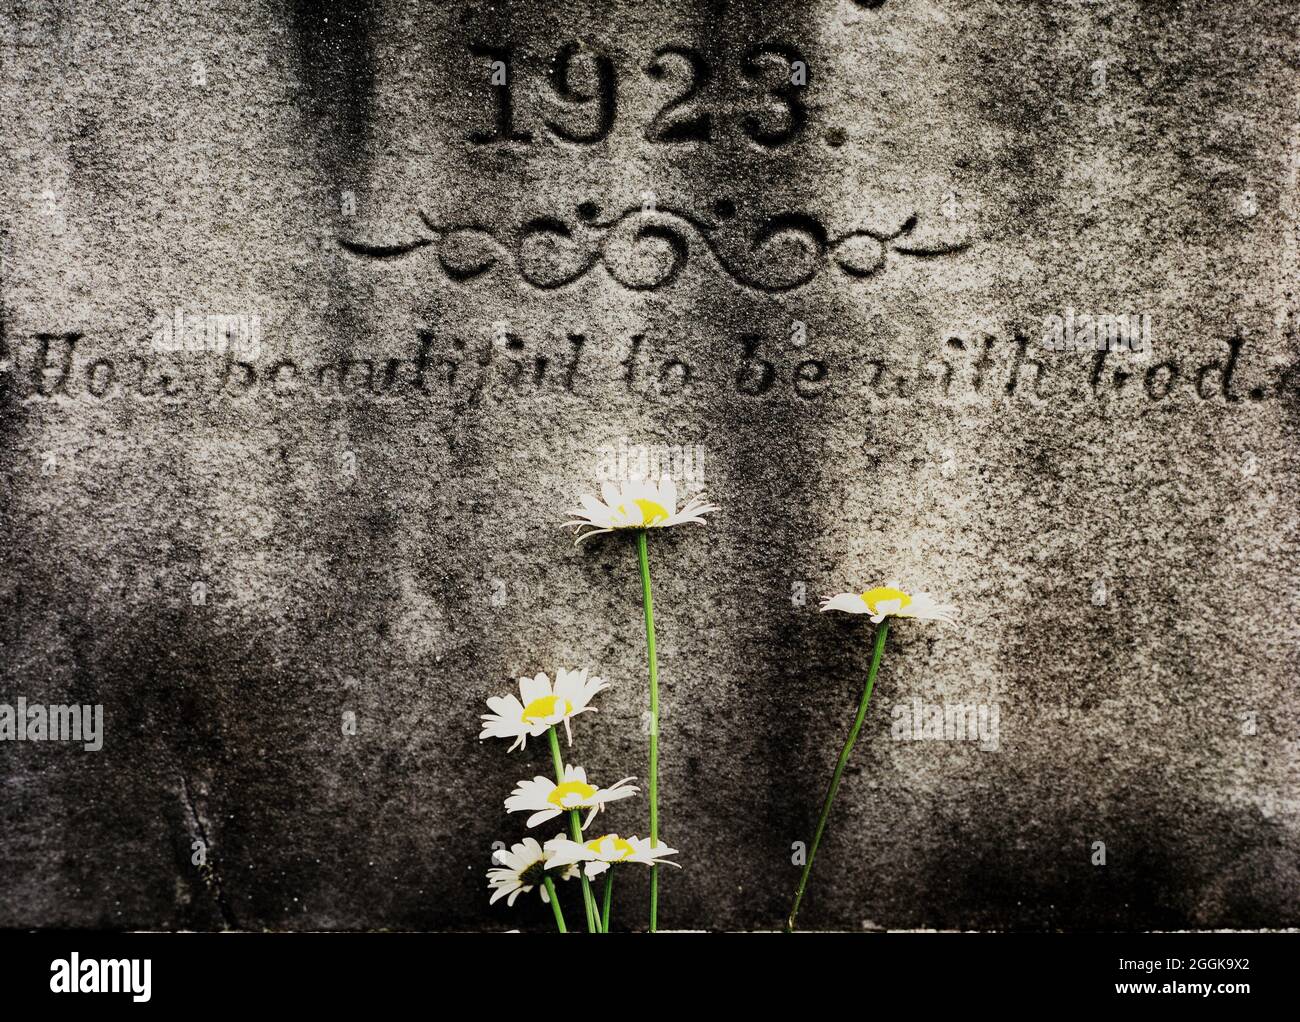 New England cemetery gravestone with epitaph and flowers Stock Photo